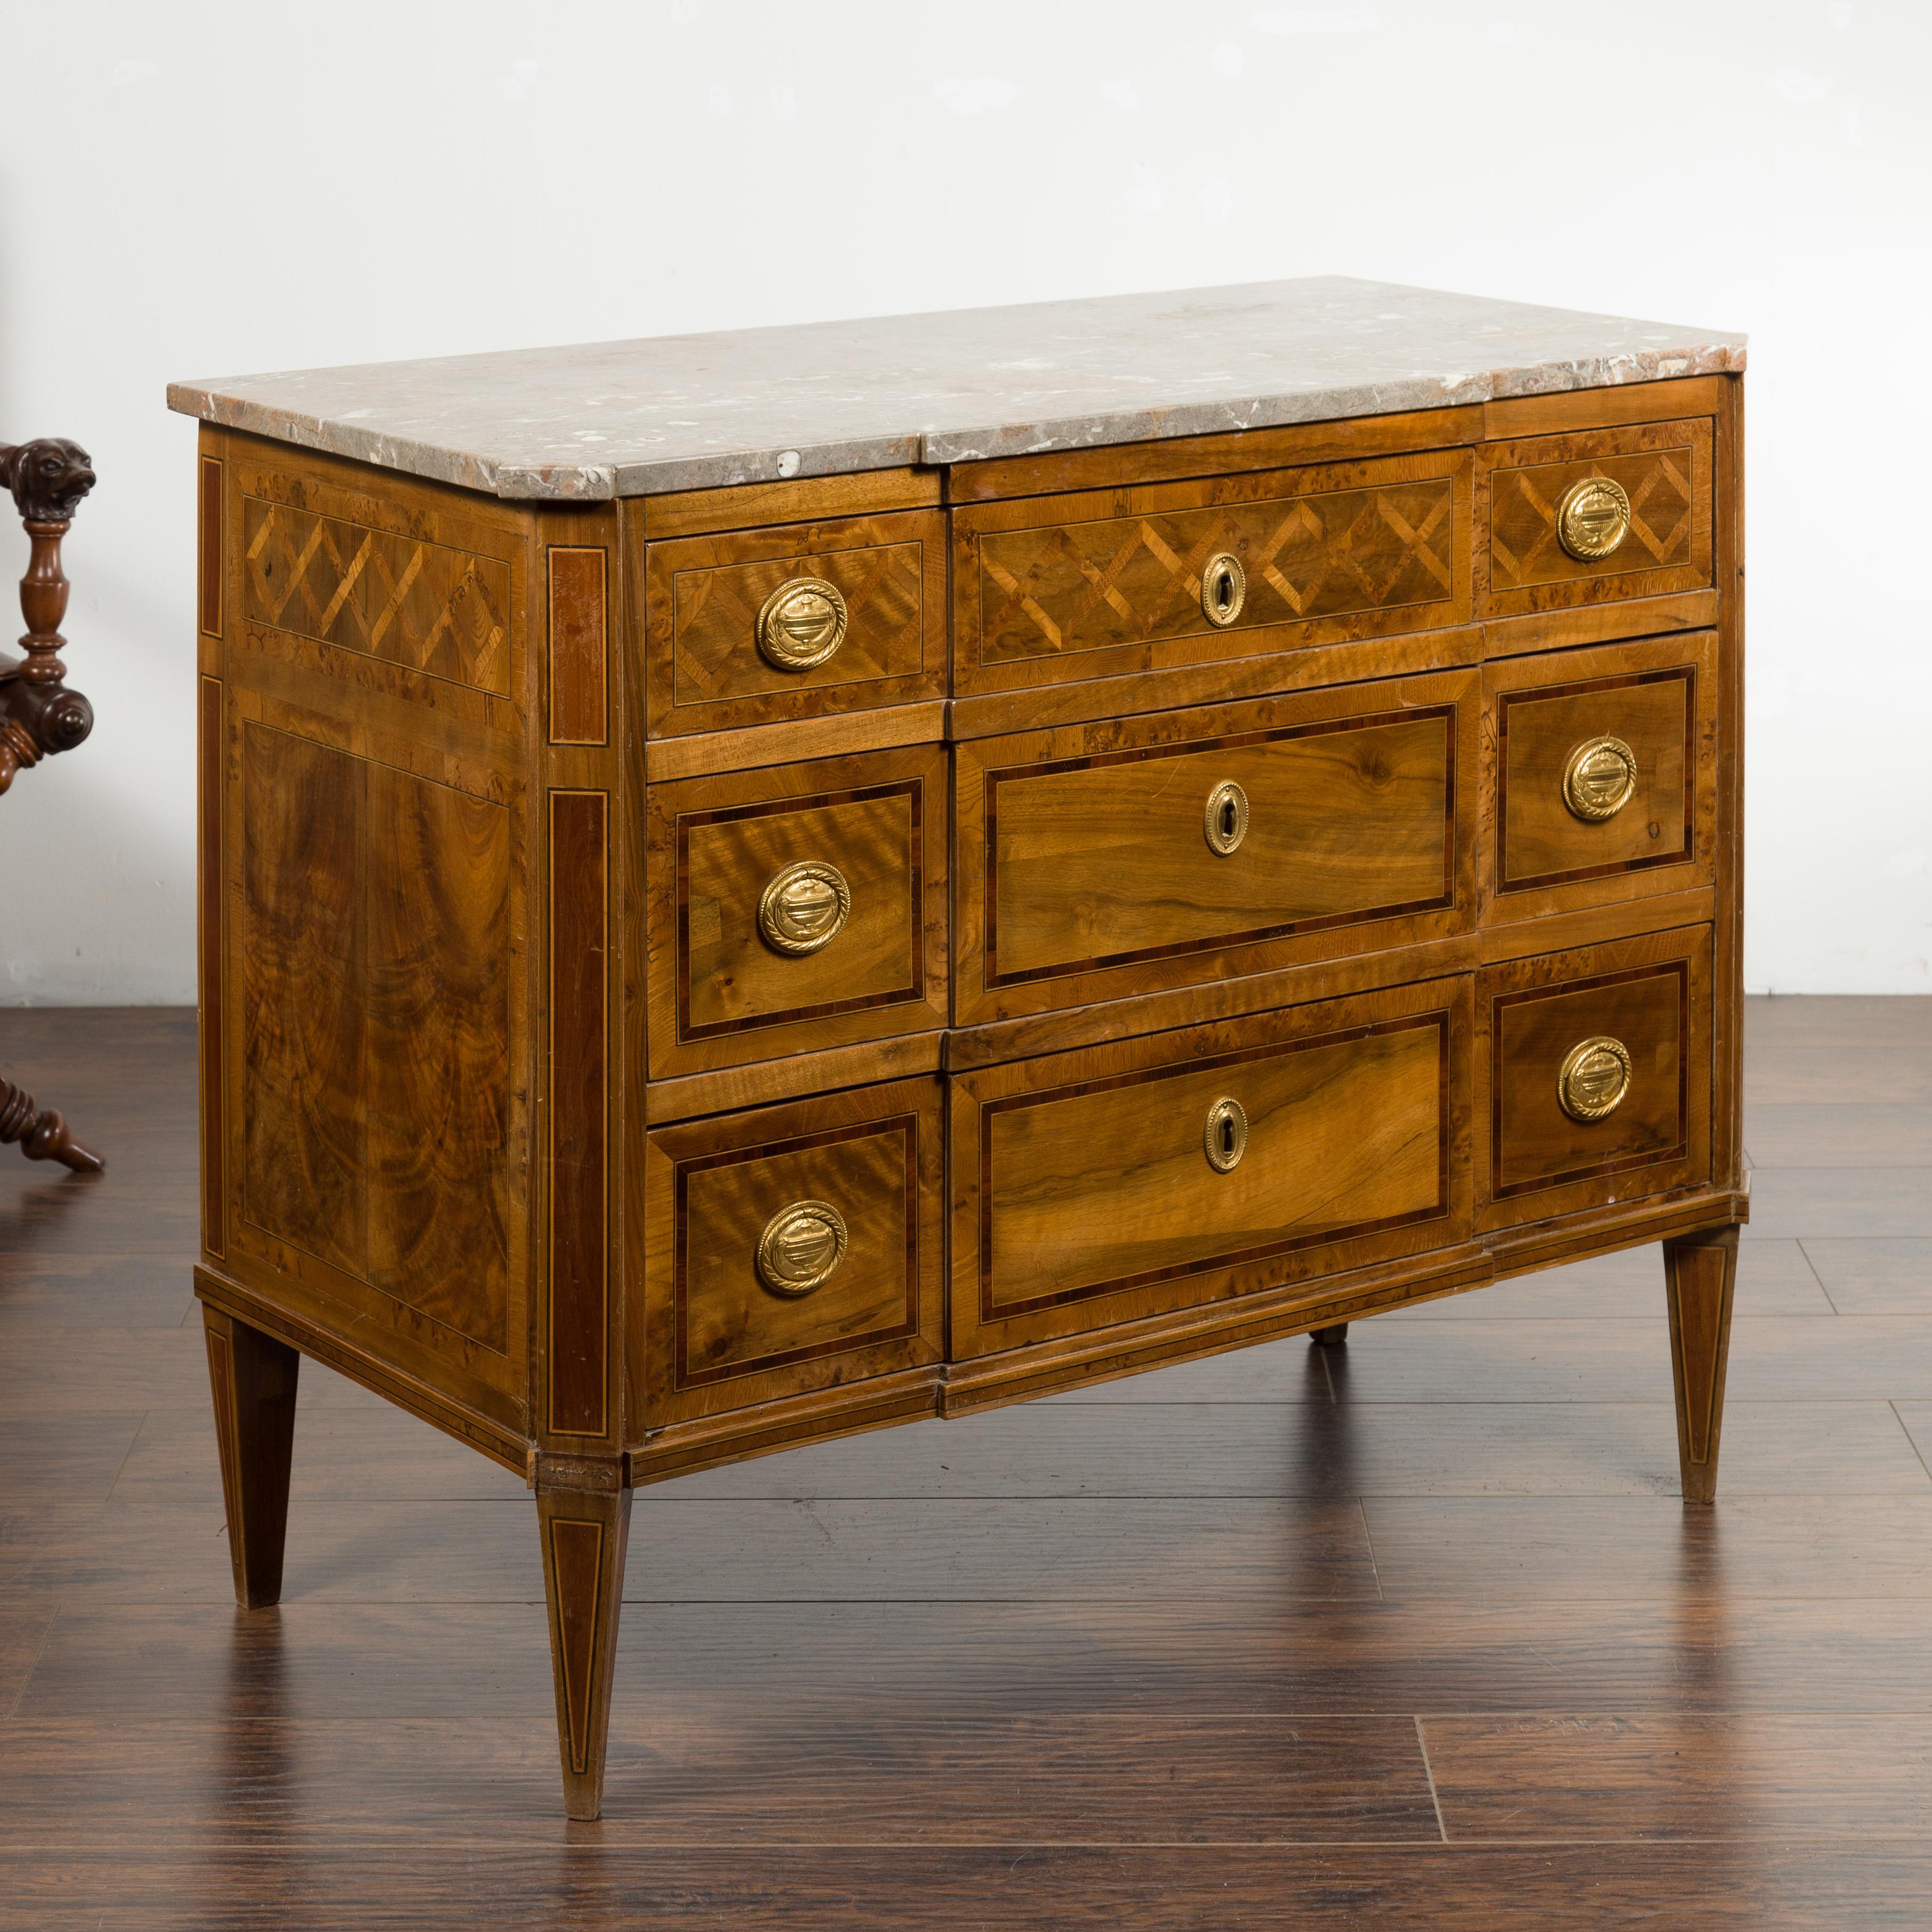 Veneer Italian 1820s Neoclassical Walnut Commode with Marble Top and Marquetry Decor